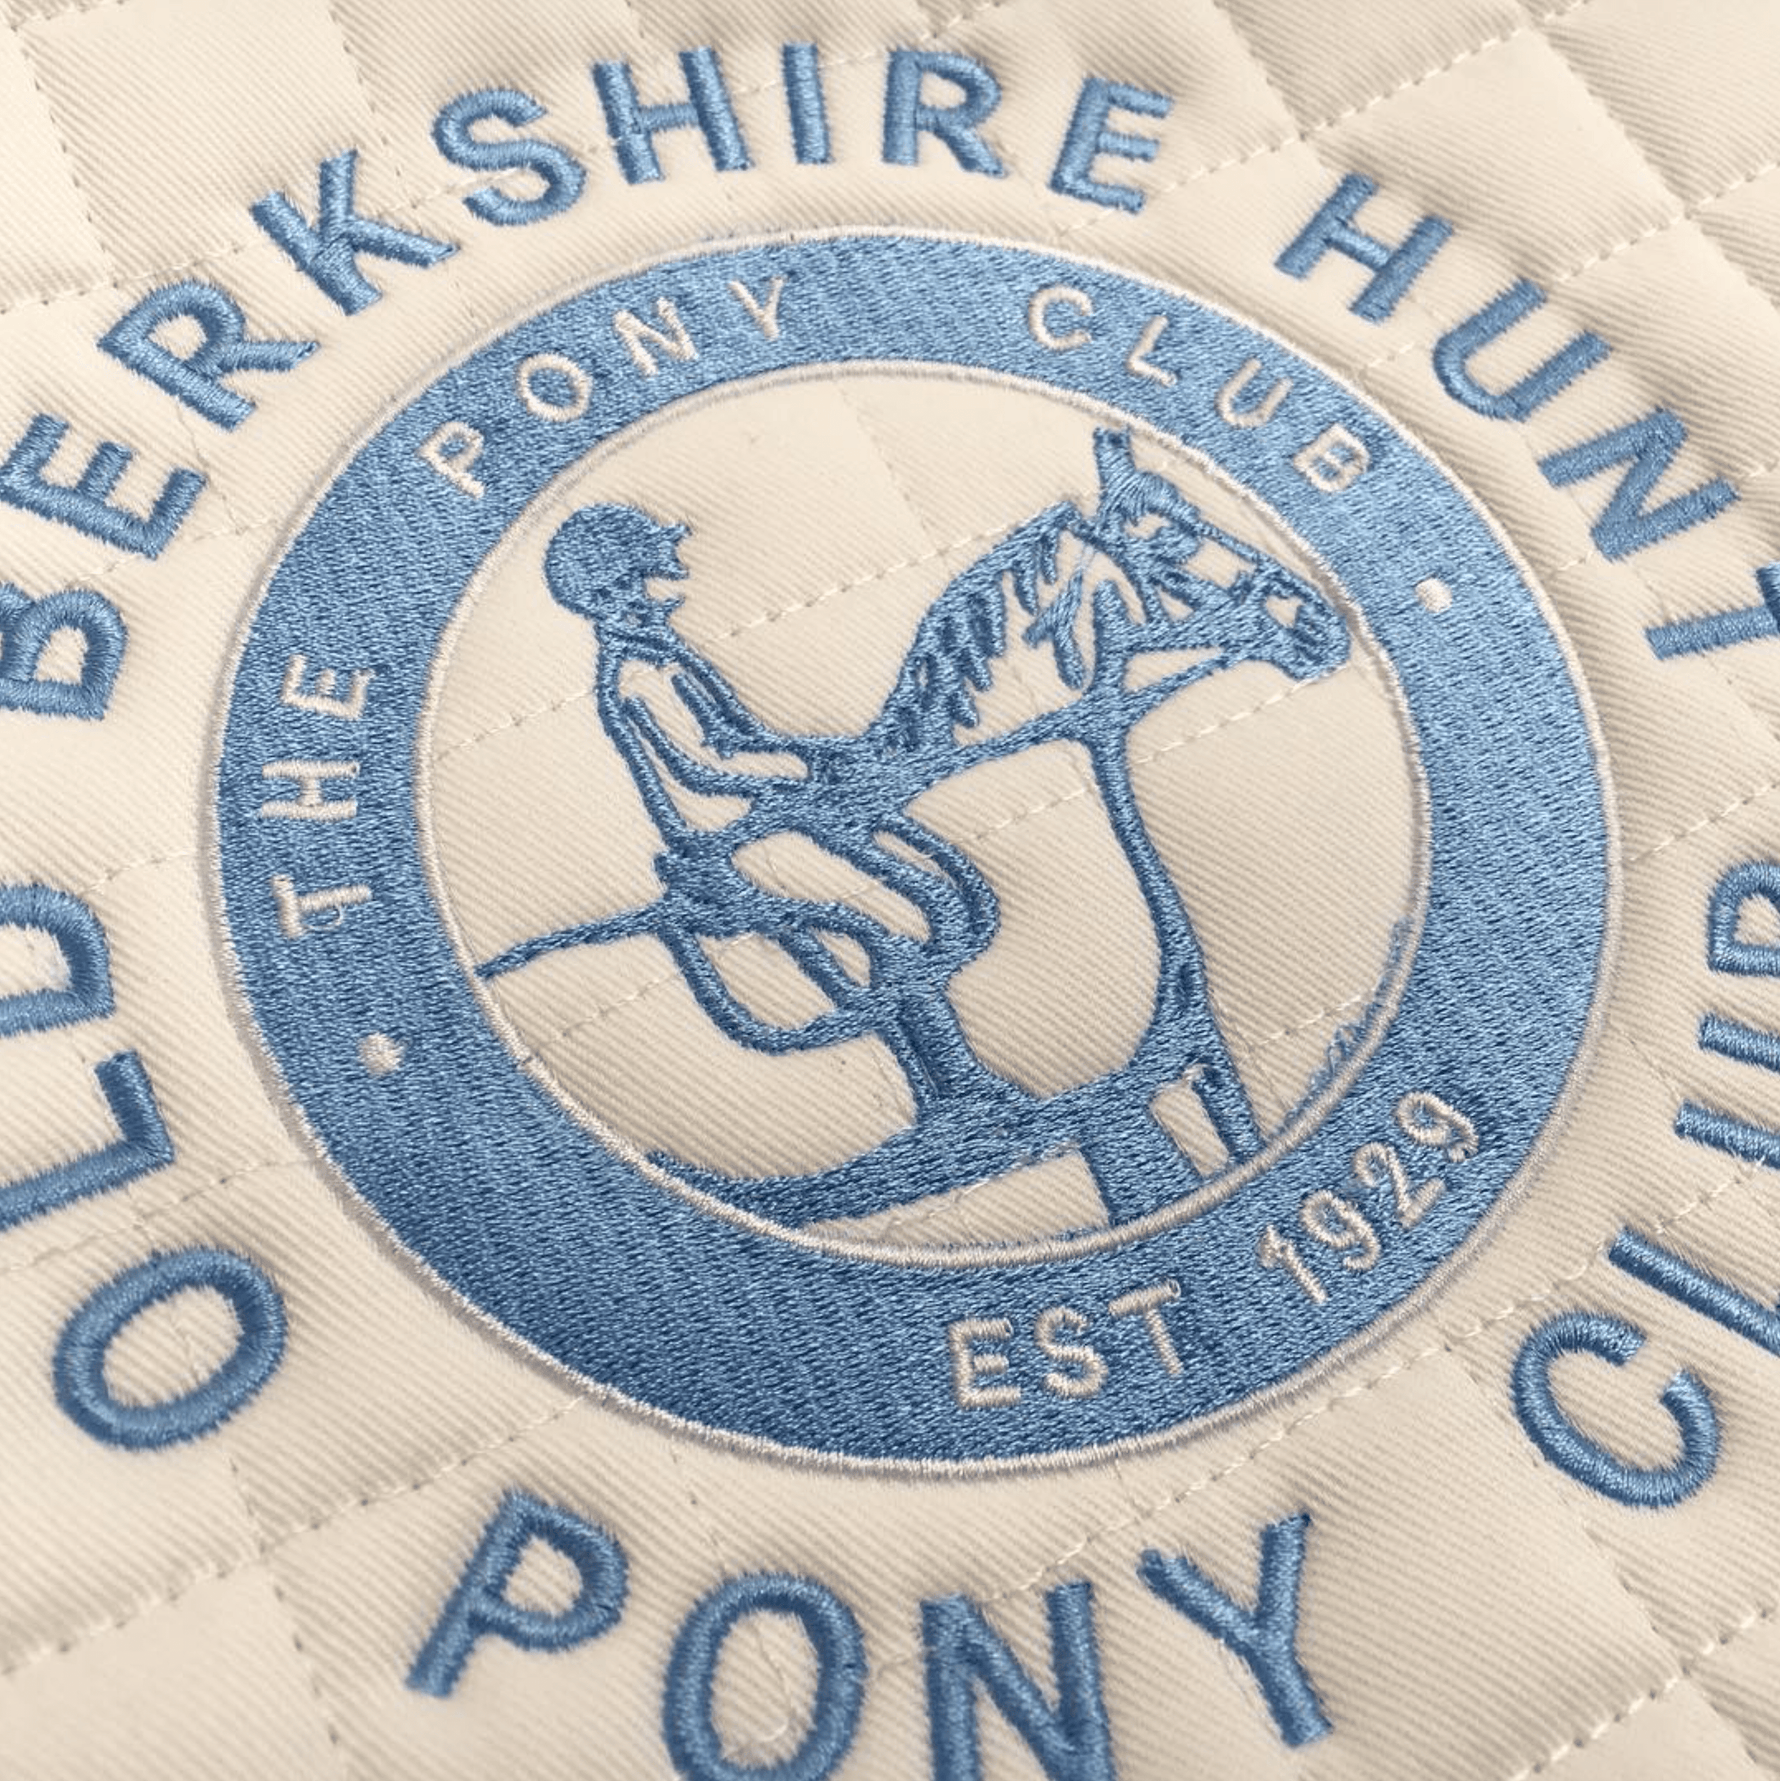 Equestrian Elegance: Close-Up of Embroidered Horse Blanket, Showcasing Intricate Details and Artistry